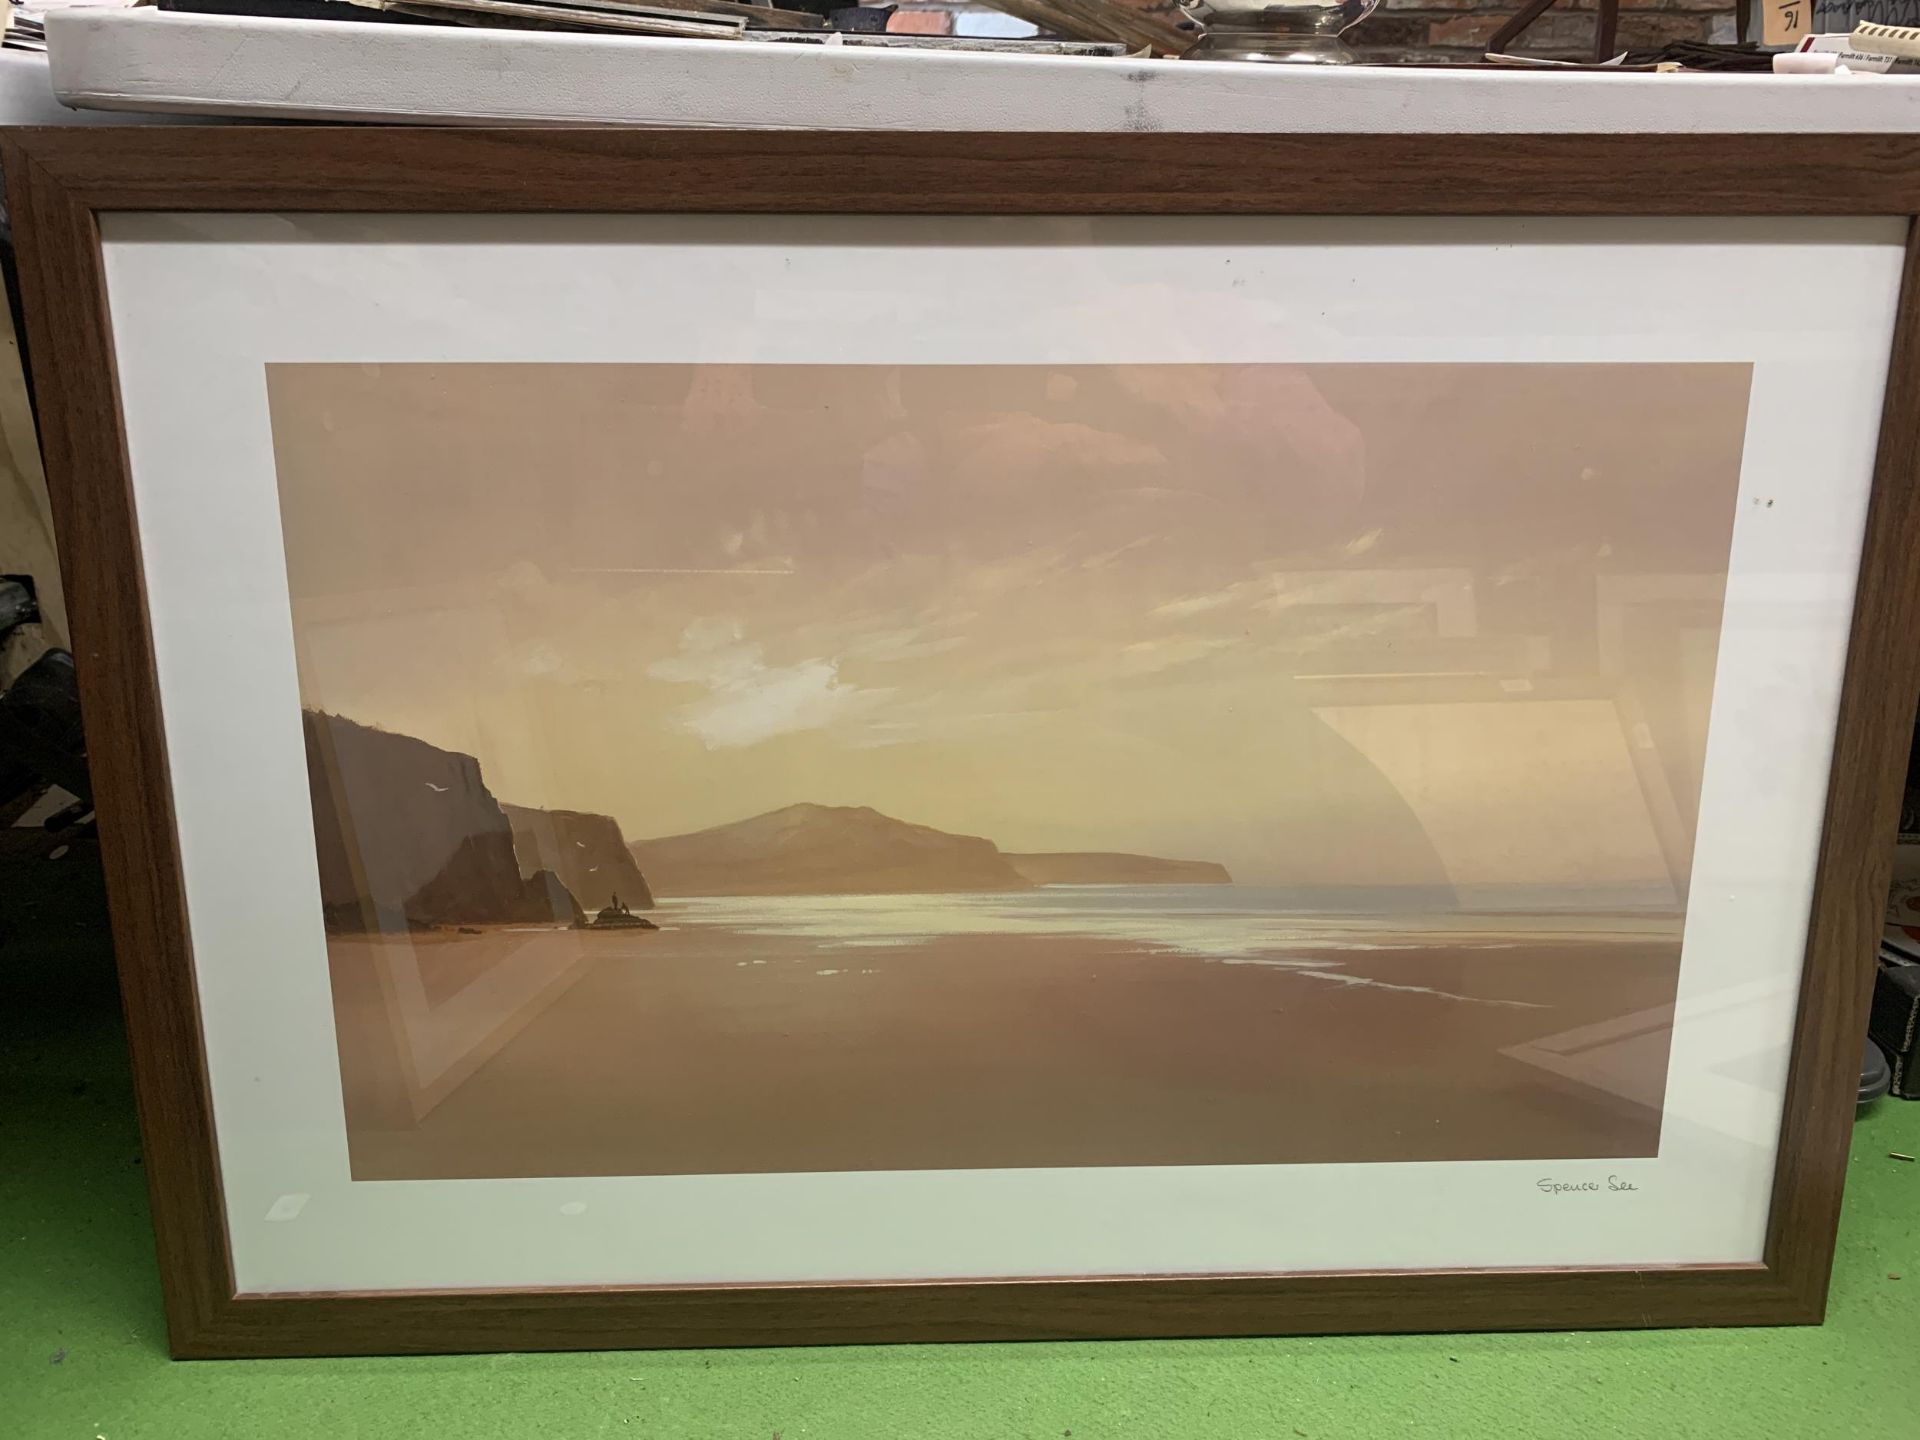 A GROUP OF FOUR MODERN FRAMED PRINTS TO INCLUDE A PAIR OF SUNSET BEACH SCENE EXAMPLES, SPENCER SEE - Image 2 of 4